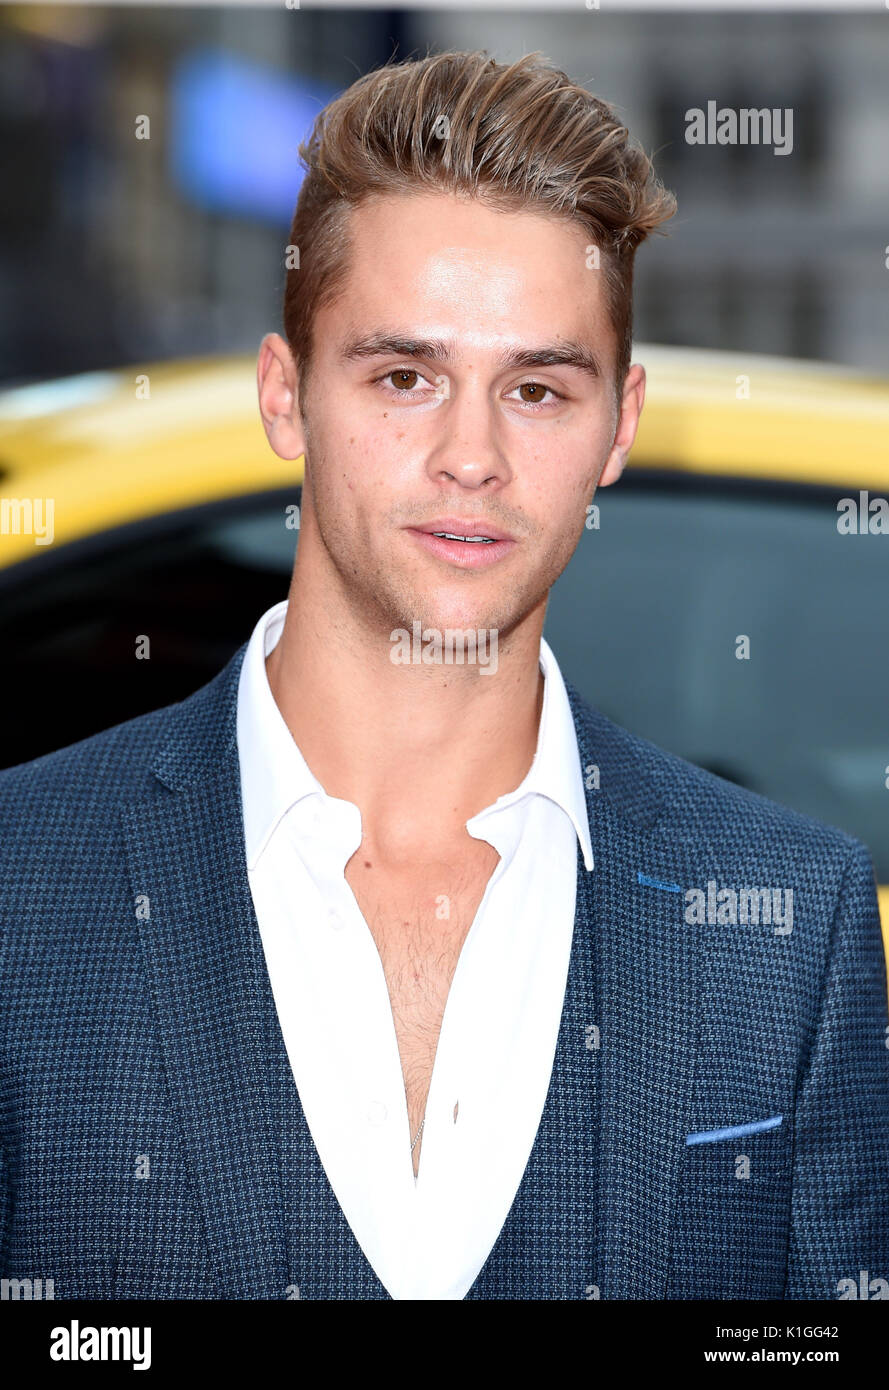 Photo Must Be Credited ©Alpha Press 079965 21/08/2017 Julius Cowdrey at the Logan Lucky Movie Premiere held at VUE West End in Leicester Square, London Stock Photo